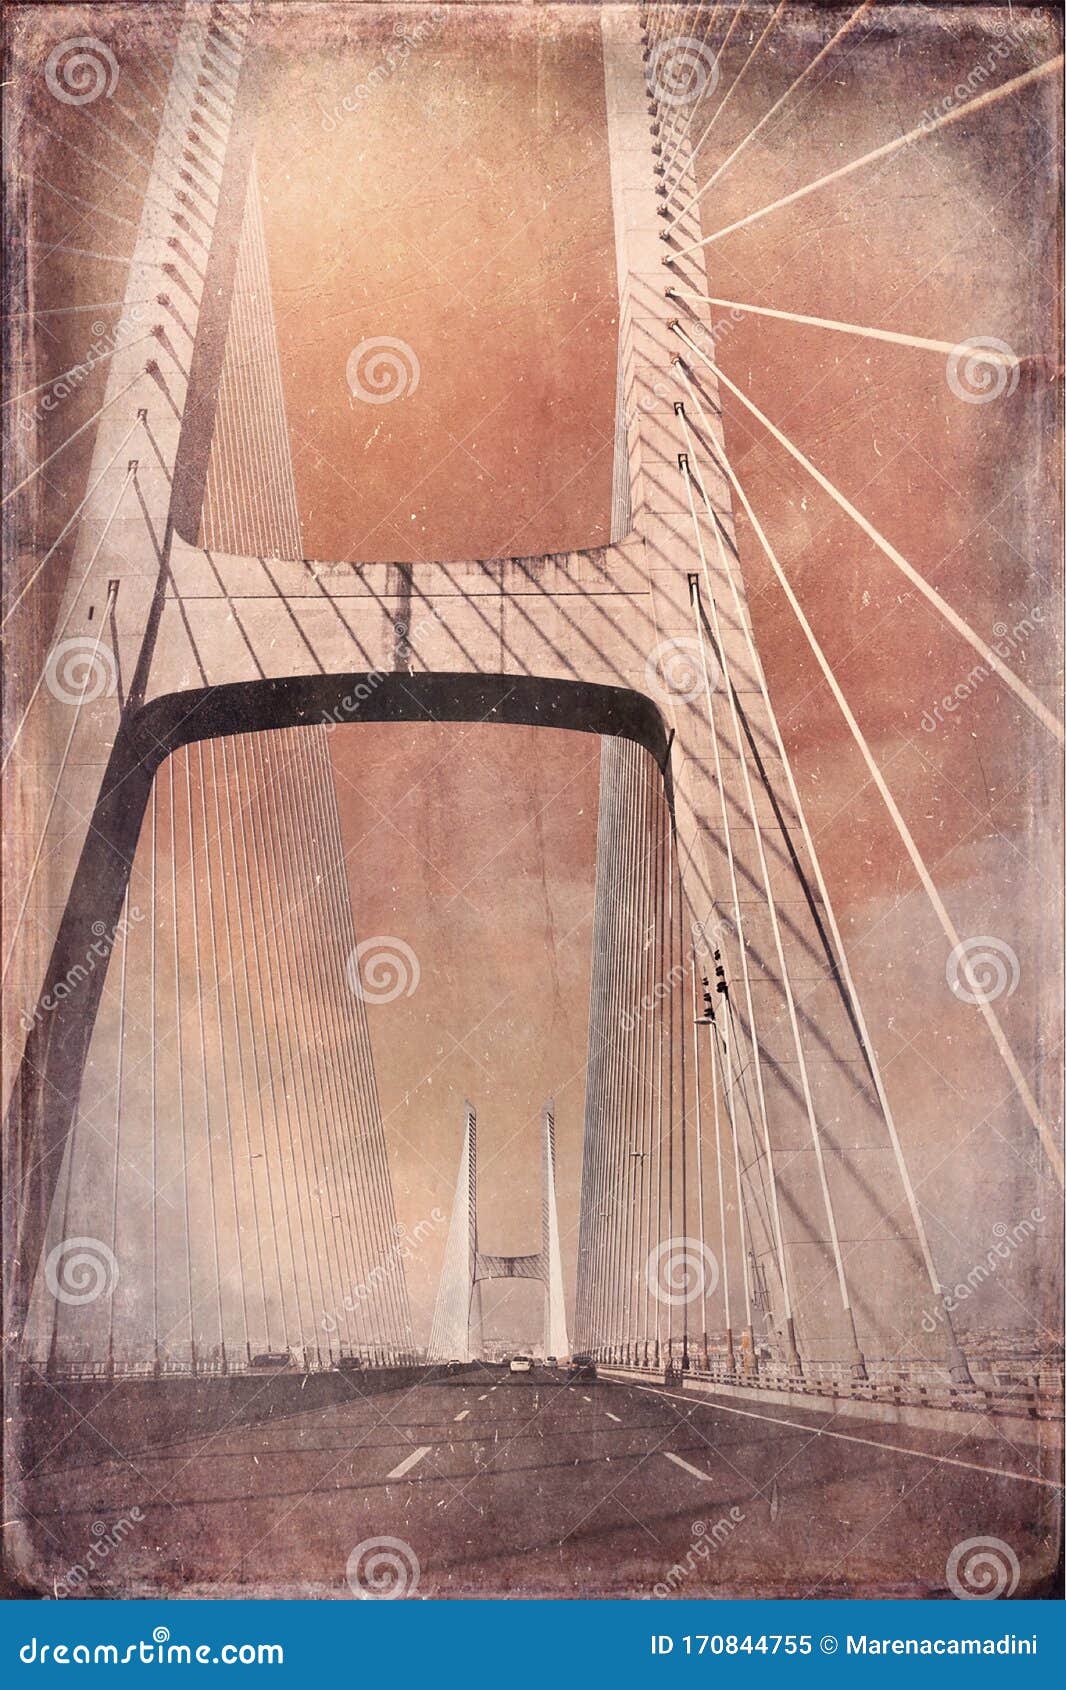 abstract composition of the bridge in lisboa lissabon portugal